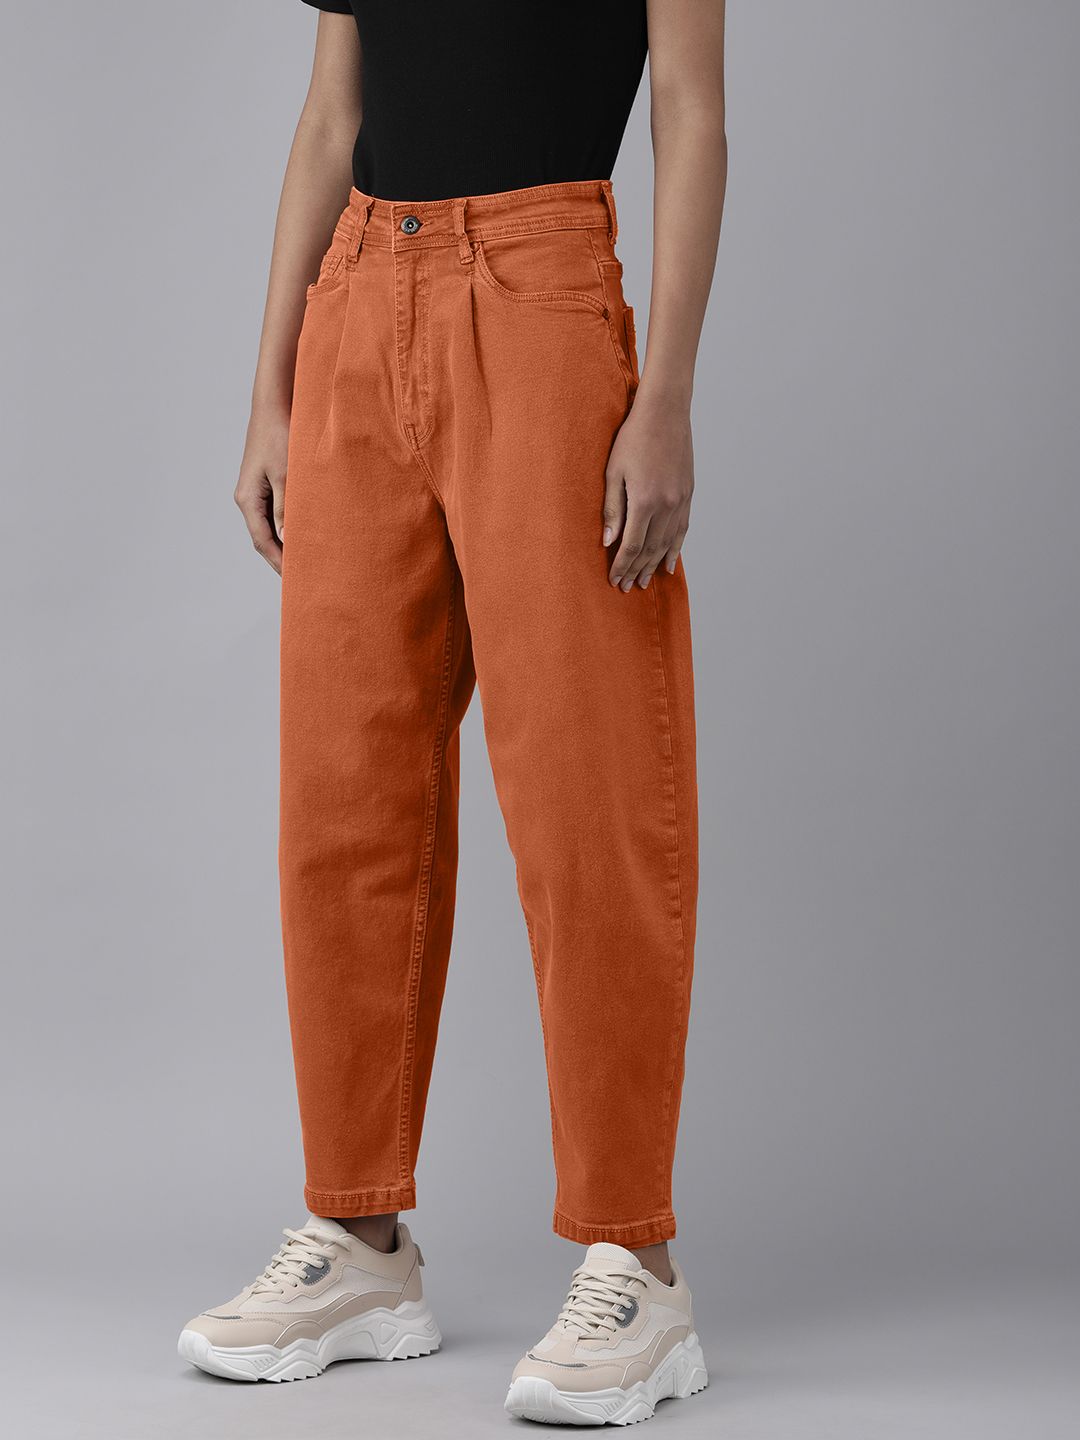 Roadster Women Orange Slouchy Fit High-Rise Stretchable Jeans Price in India